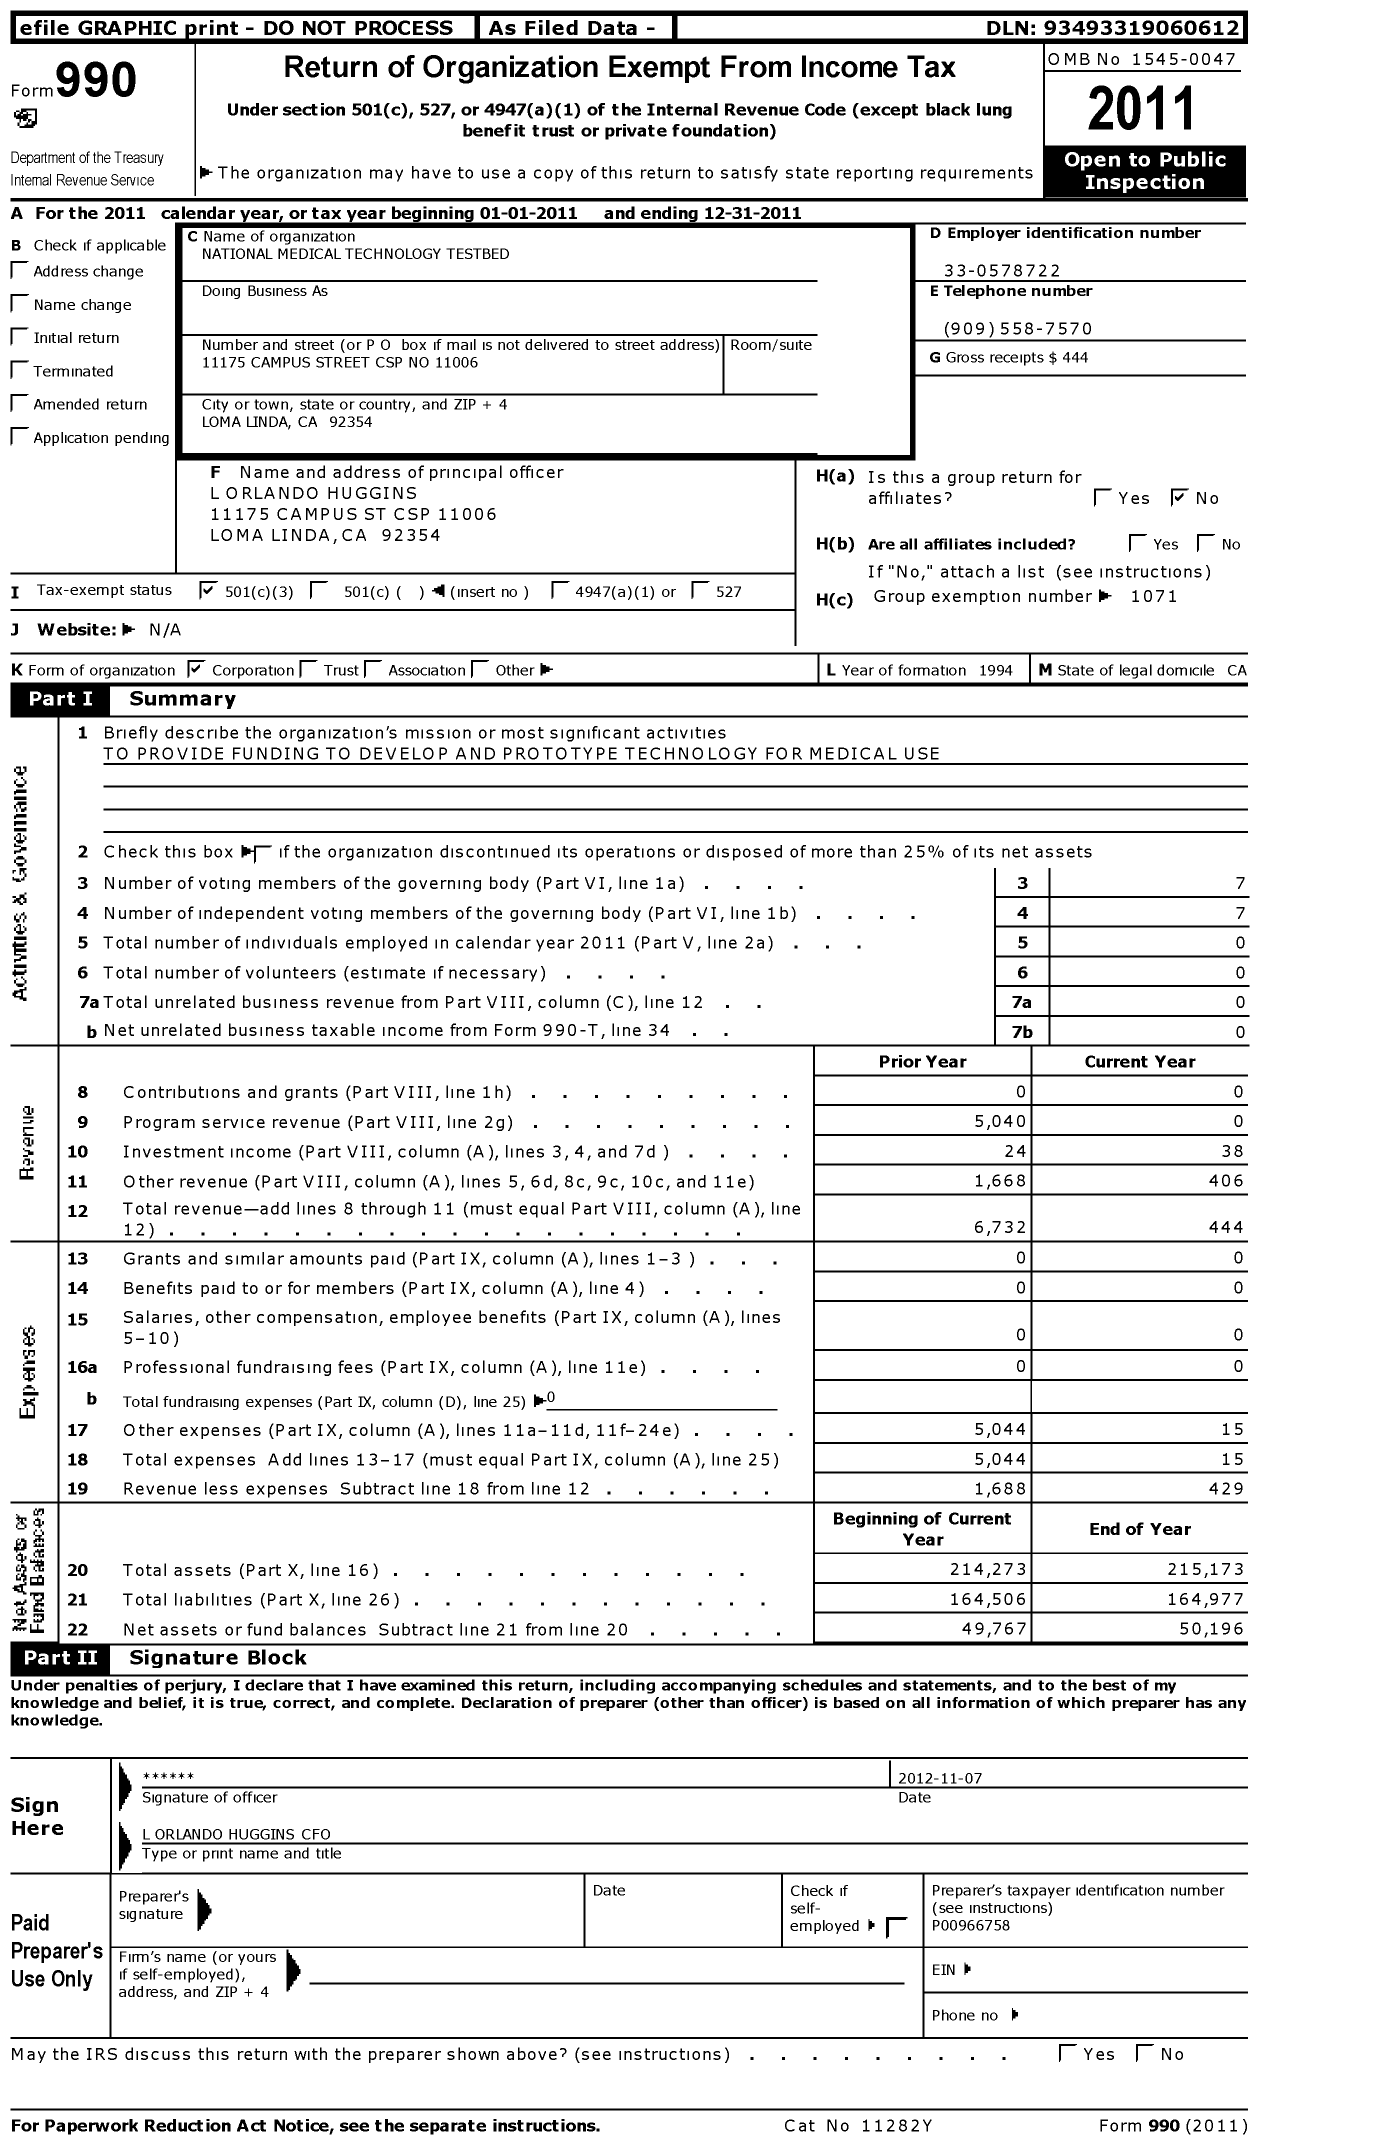 Image of first page of 2011 Form 990 for National Medical Technology Testbed